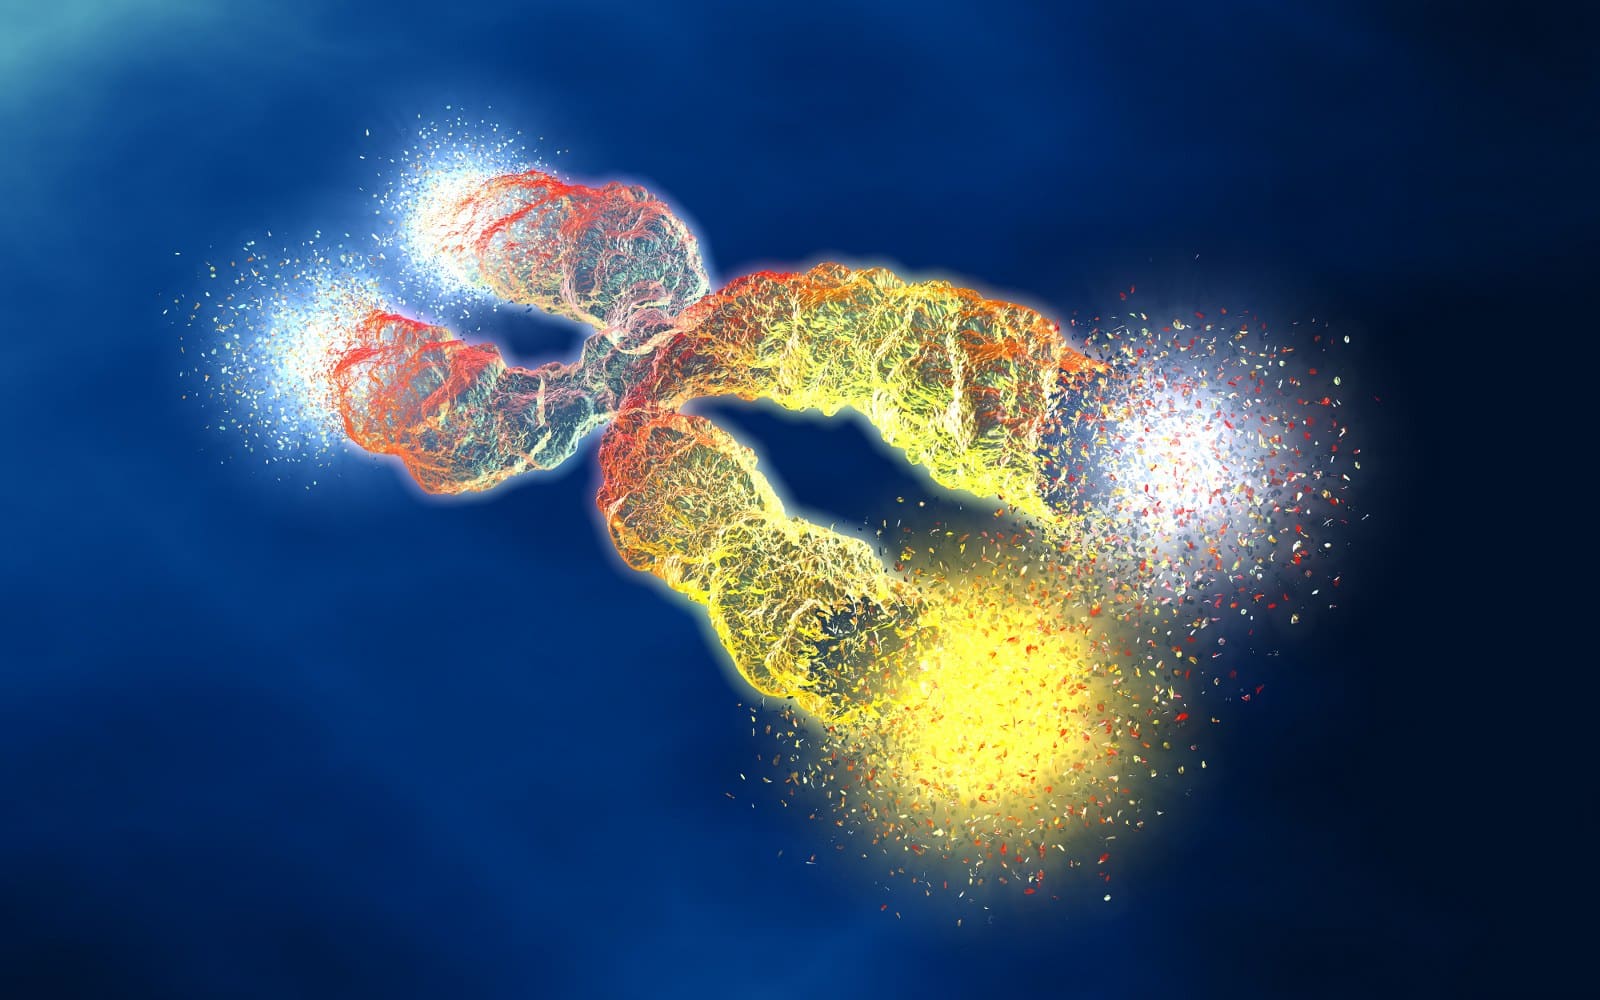 how are chromosomes different in cancer cells?